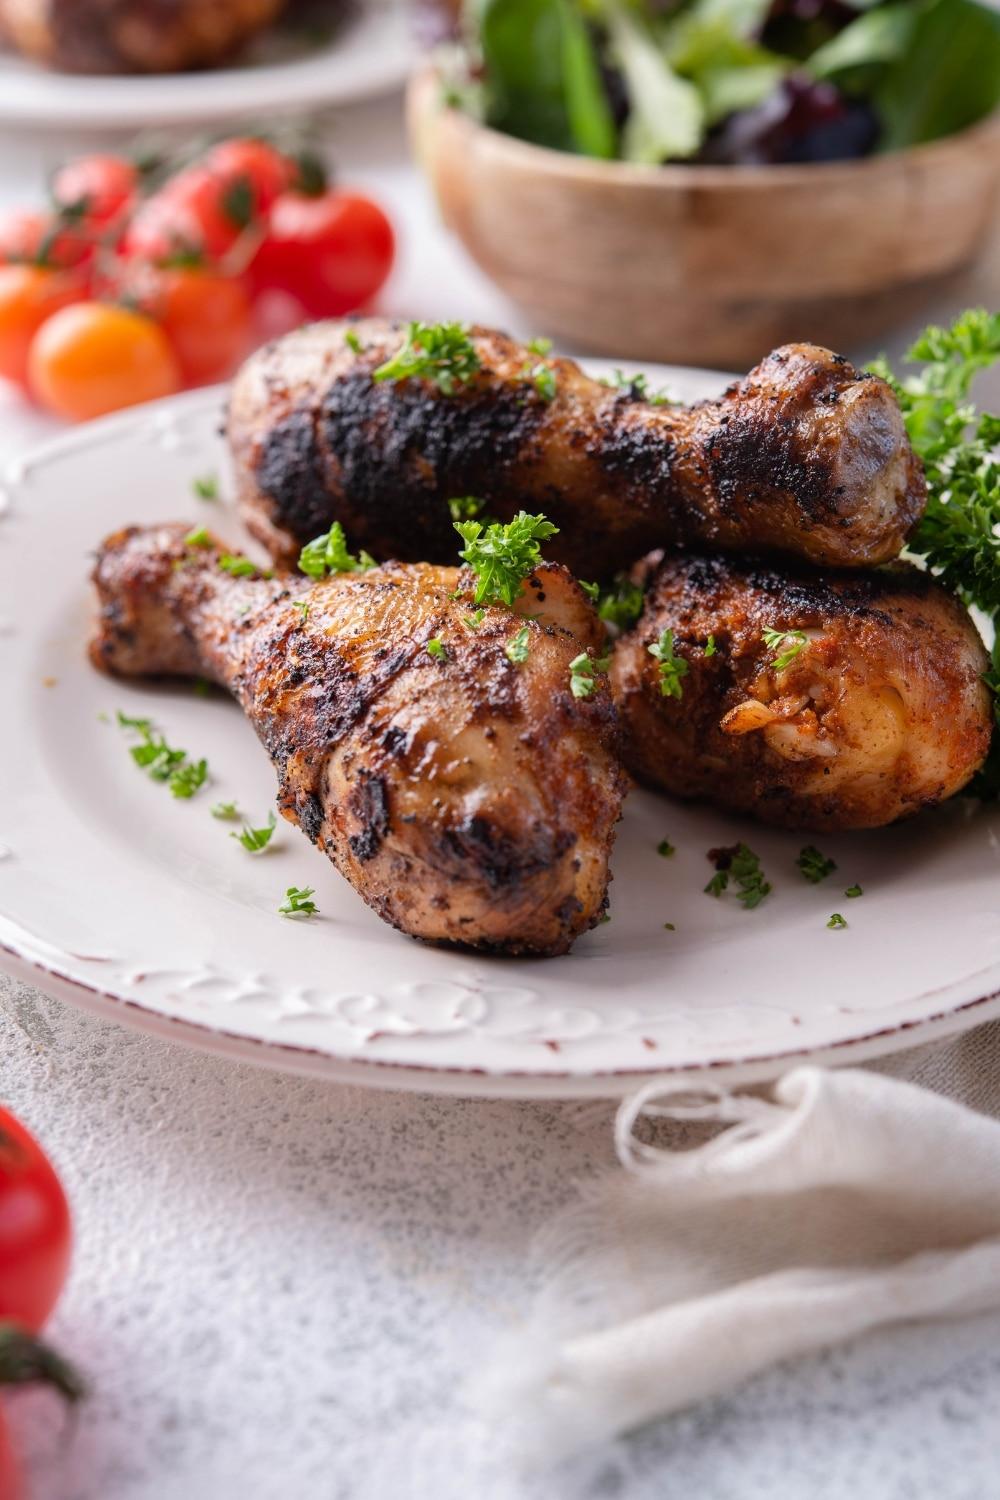 Grilled chicken legs garnished with parsley on a white plate, in front of a bowl of salad and fresh cherry tomatoes.